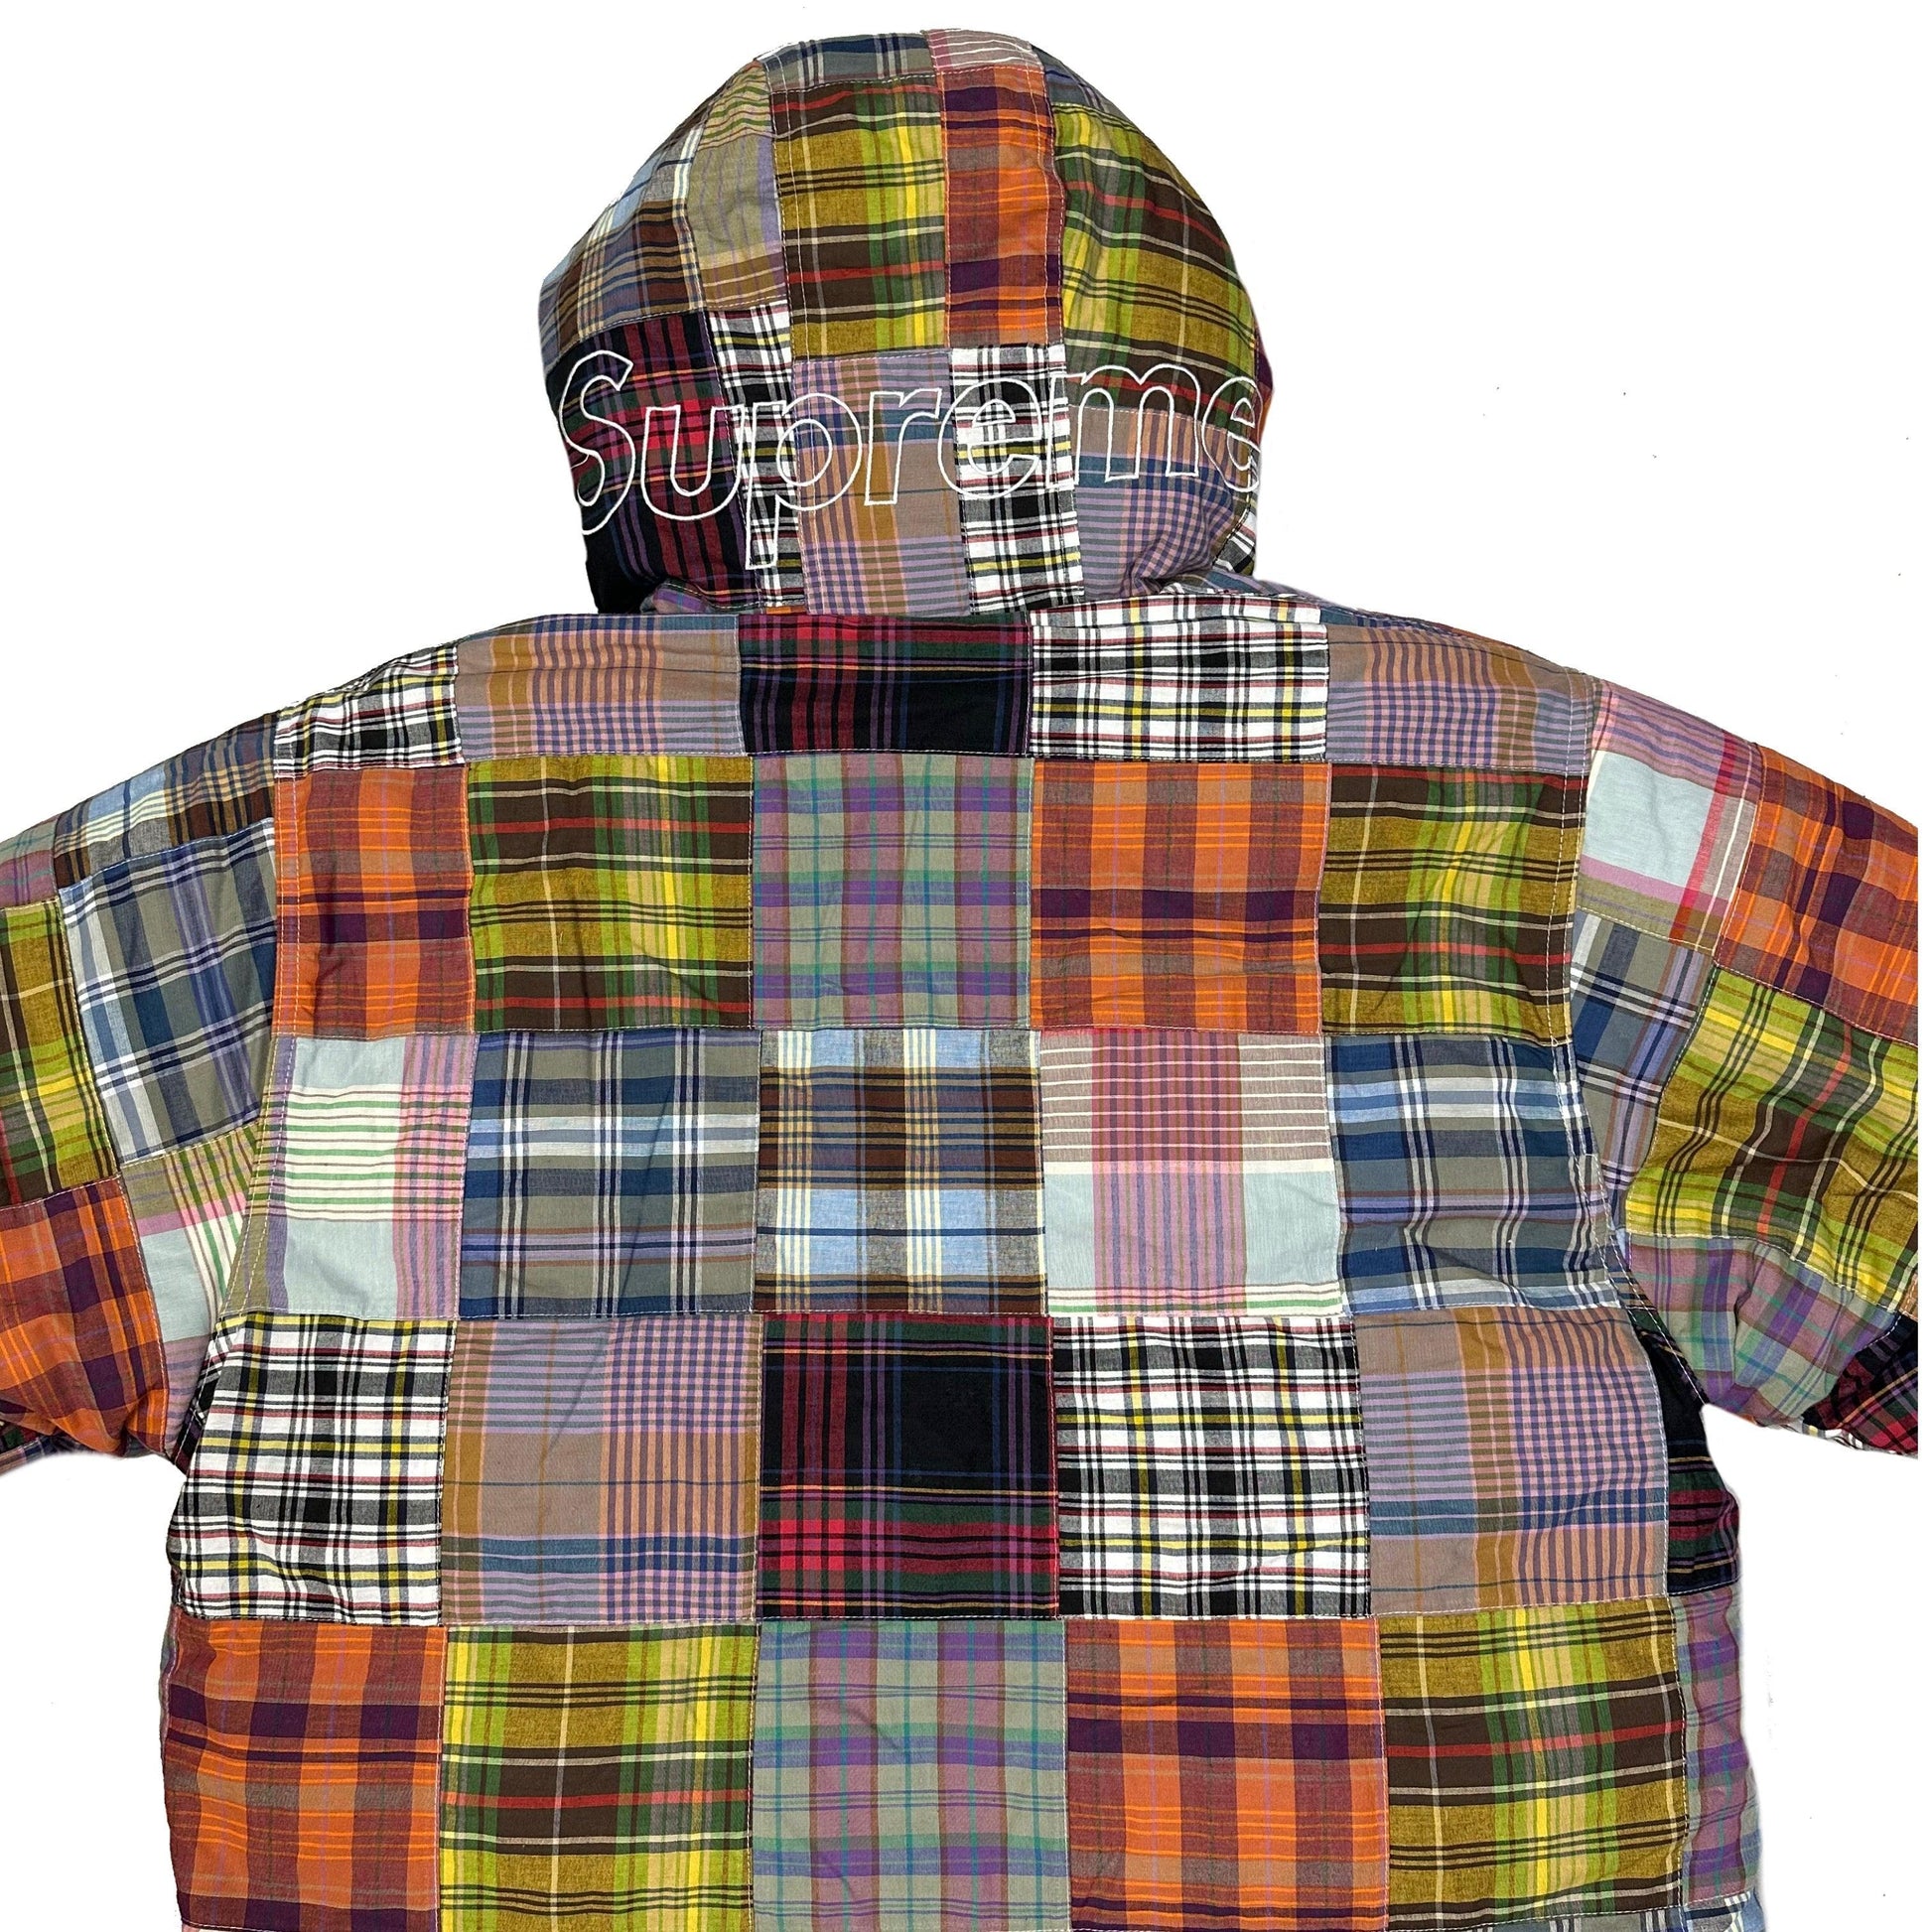 Supreme Madras Reversible Down Puffer Jacket ( XL ) - Known Source